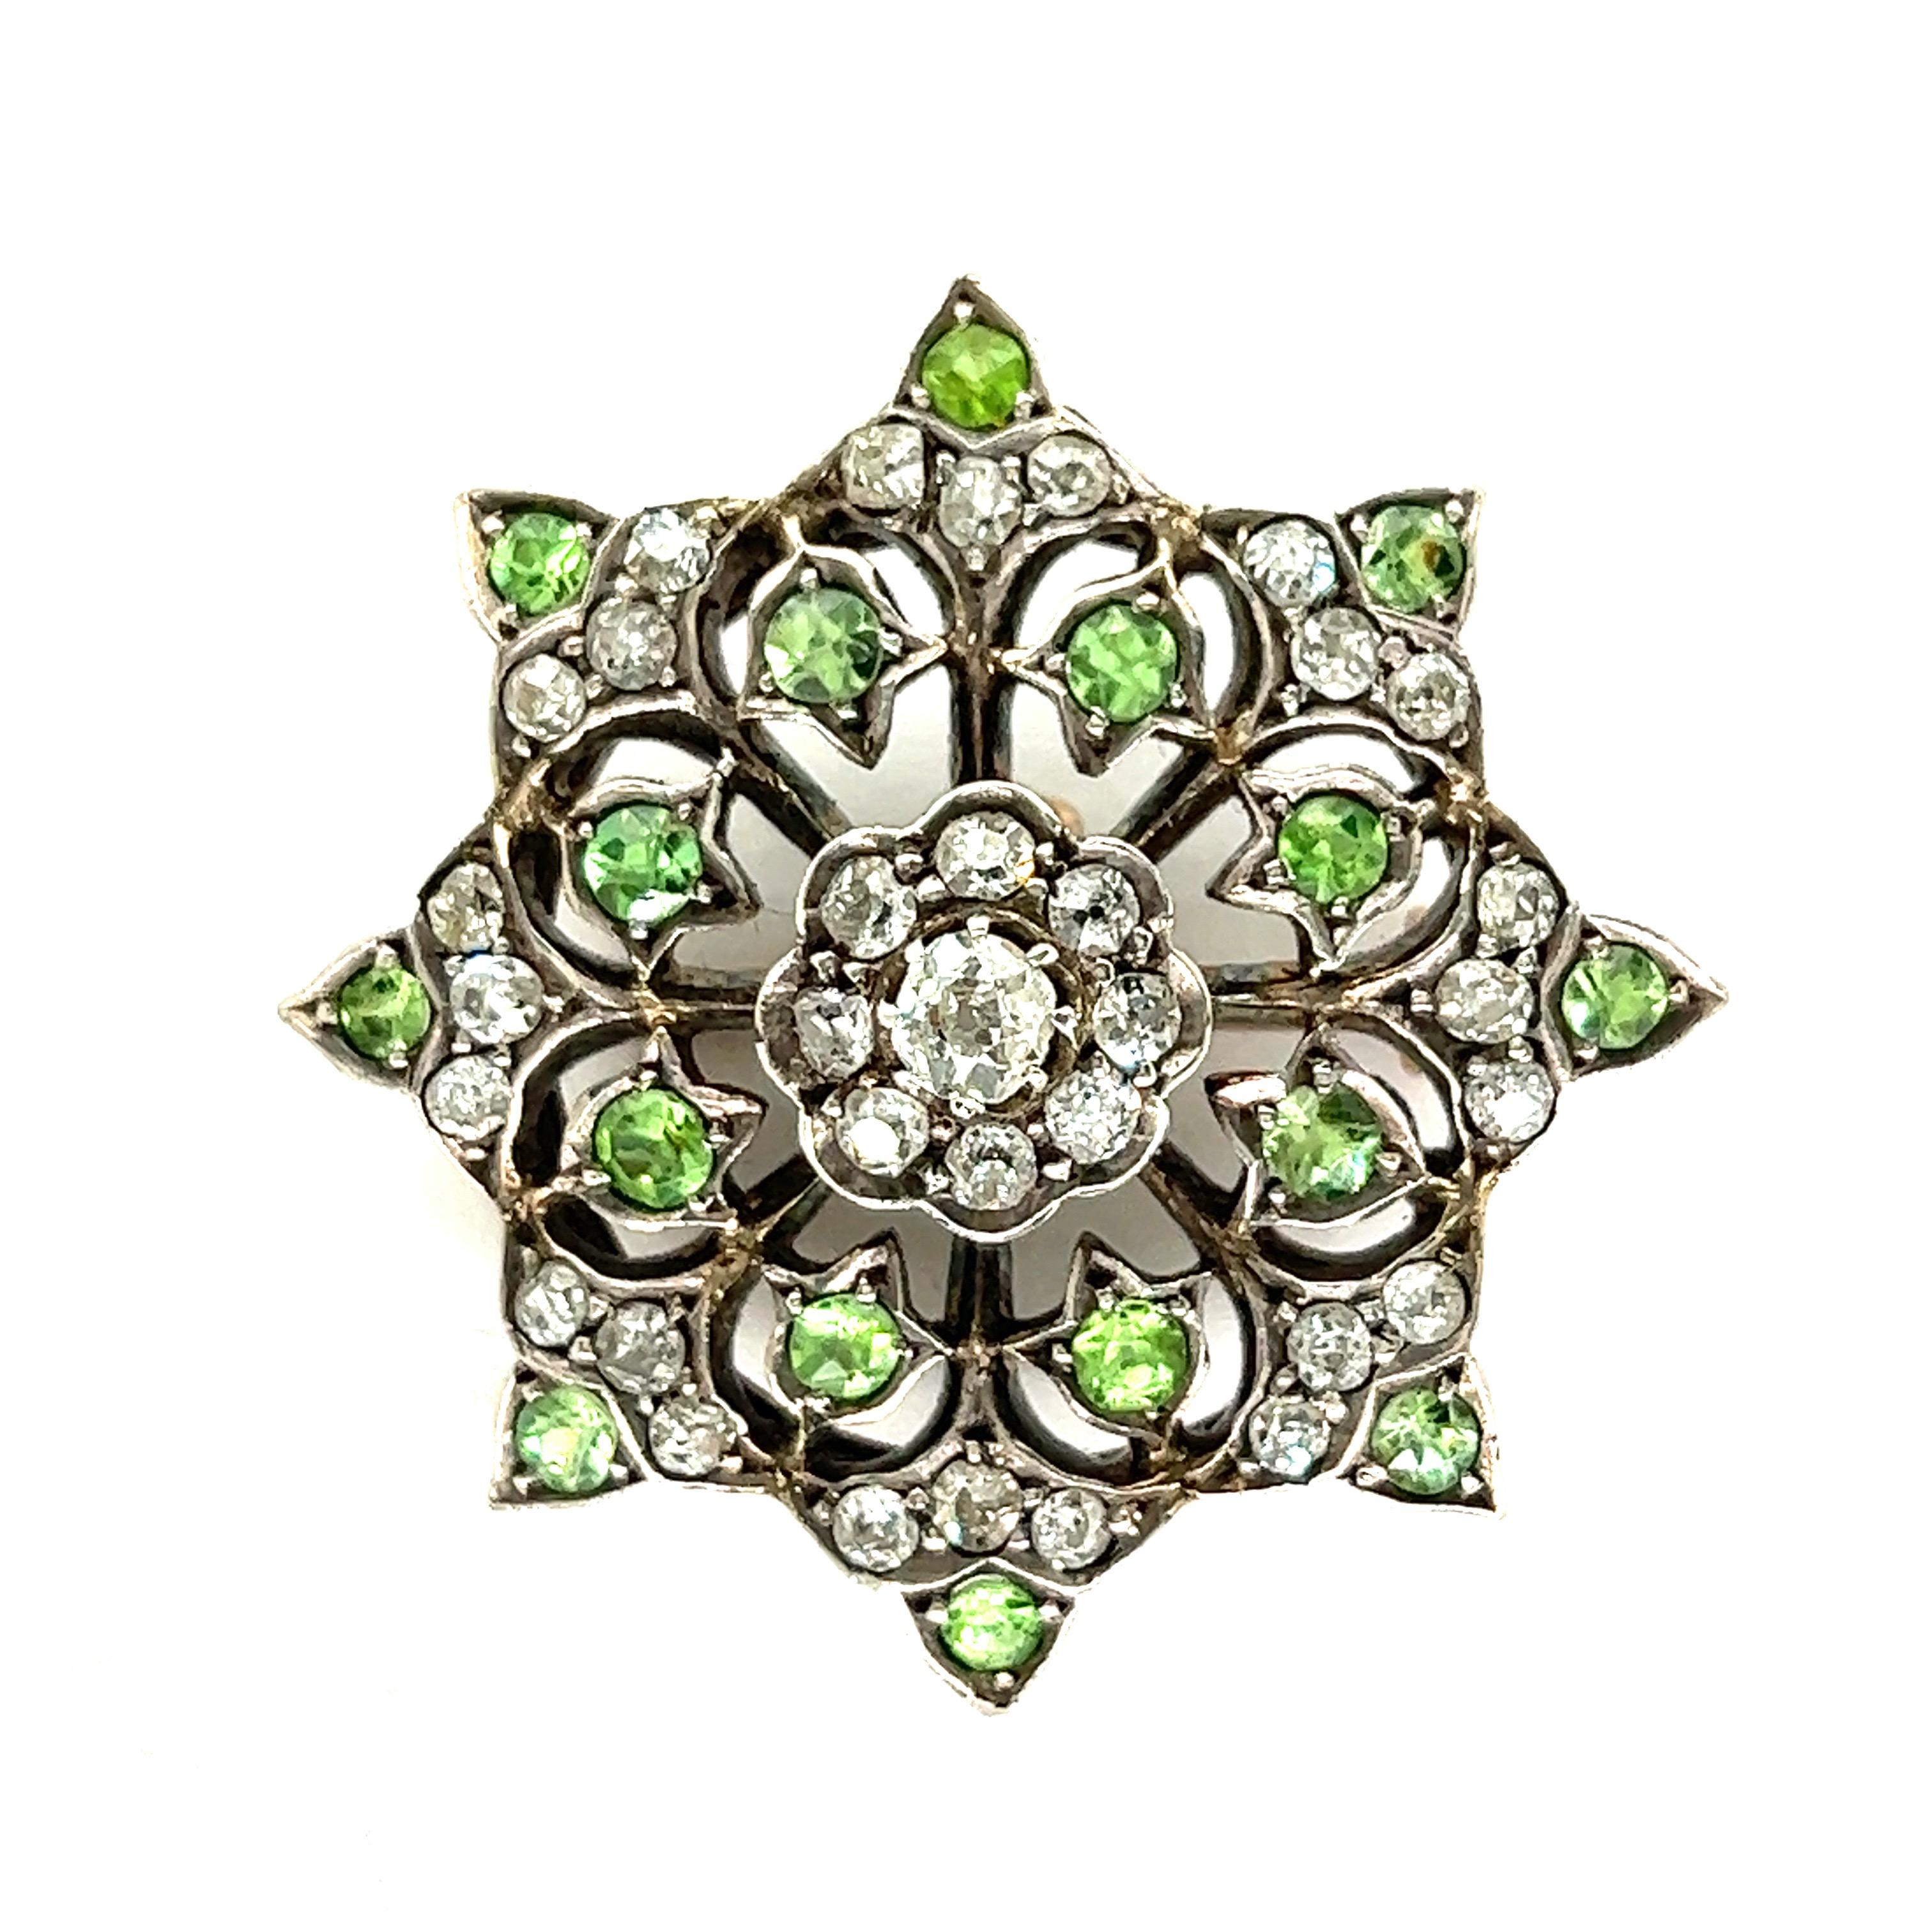 Antique Diamond Demantoid Brooch

Round-cut diamonds of approximately 1.4 carats, round-cut demantoids of approximately 1 carat

Size: width 3 cm, length 3 cm
Total weight: 10.6 grams